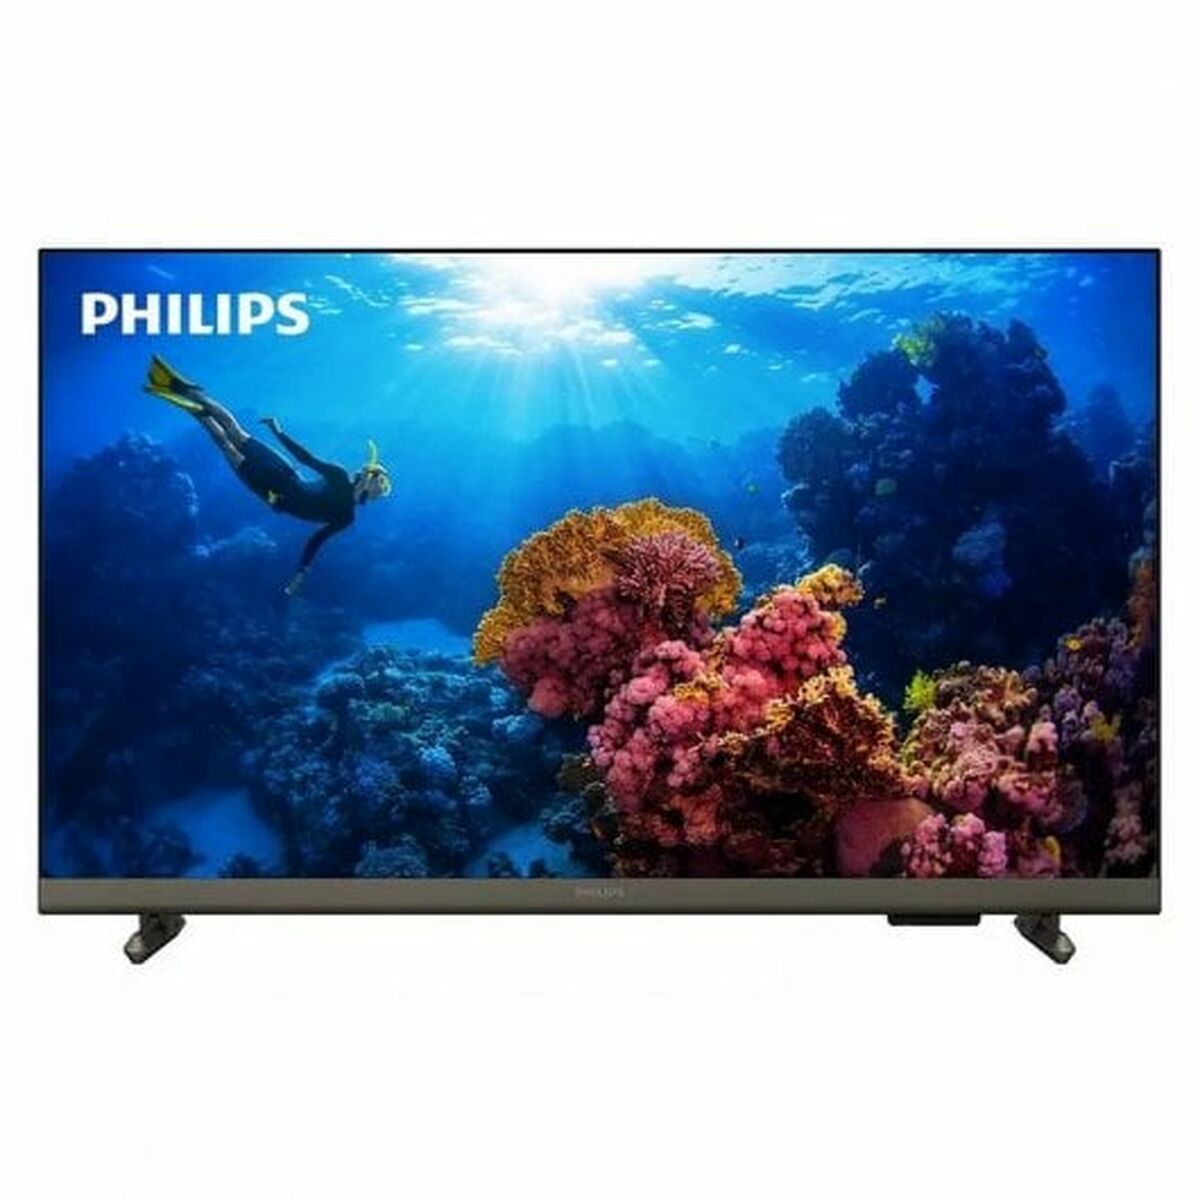 Smart TV Philips 32PHS6808/12 HD LED HDR Dolby Digital, Philips, Electronics, TV, Video and home cinema, smart-tv-philips-32phs6808-12-hd-led-hdr-dolby-digital, Brand_Philips, category-reference-2609, category-reference-2625, category-reference-2931, category-reference-t-18805, category-reference-t-18827, category-reference-t-19653, cinema and television, Condition_NEW, entertainment, Price_200 - 300, RiotNook